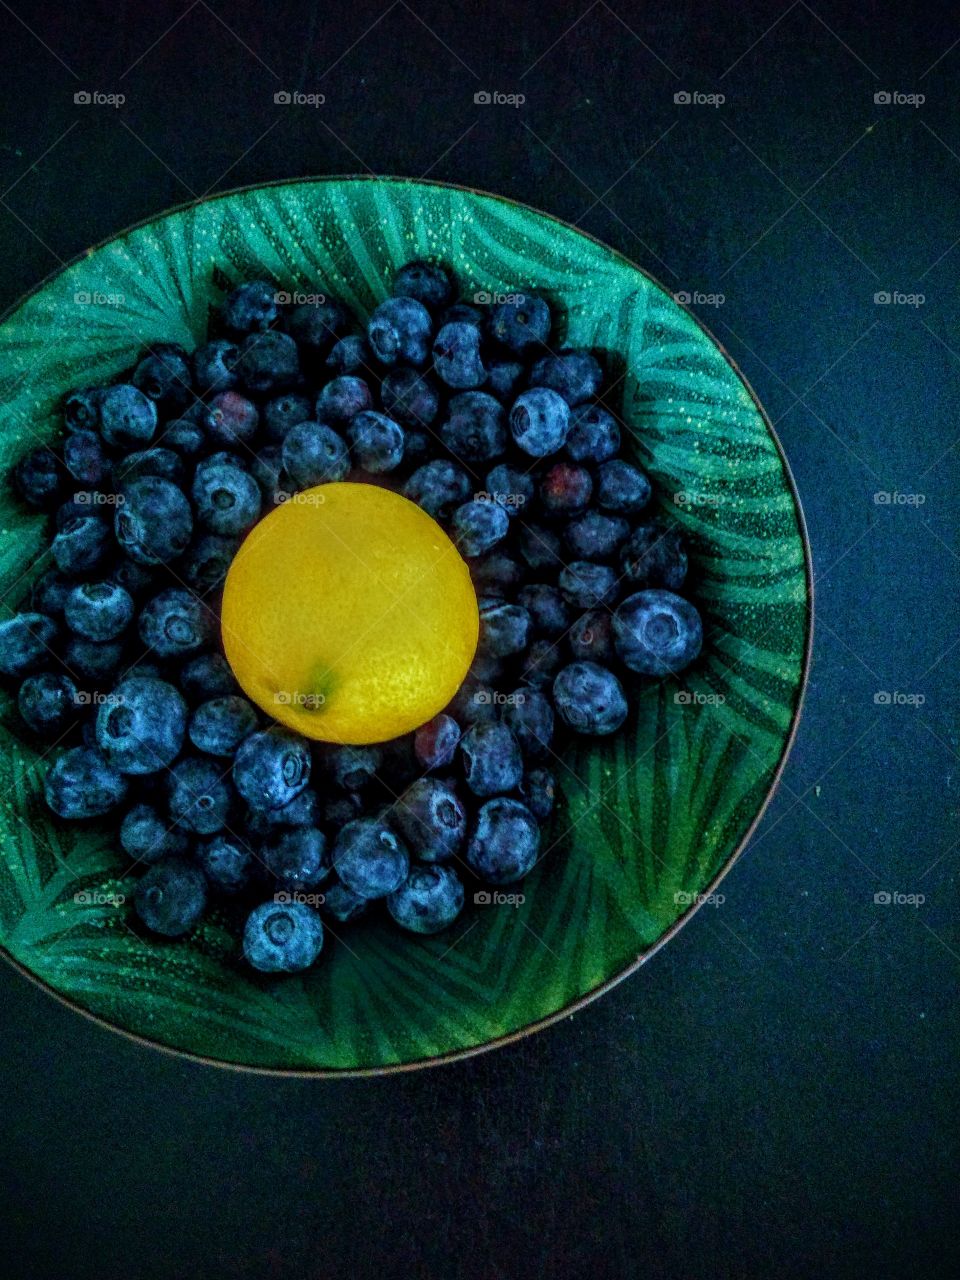 In this picture is blueberries and two lemon on a black table😊
.